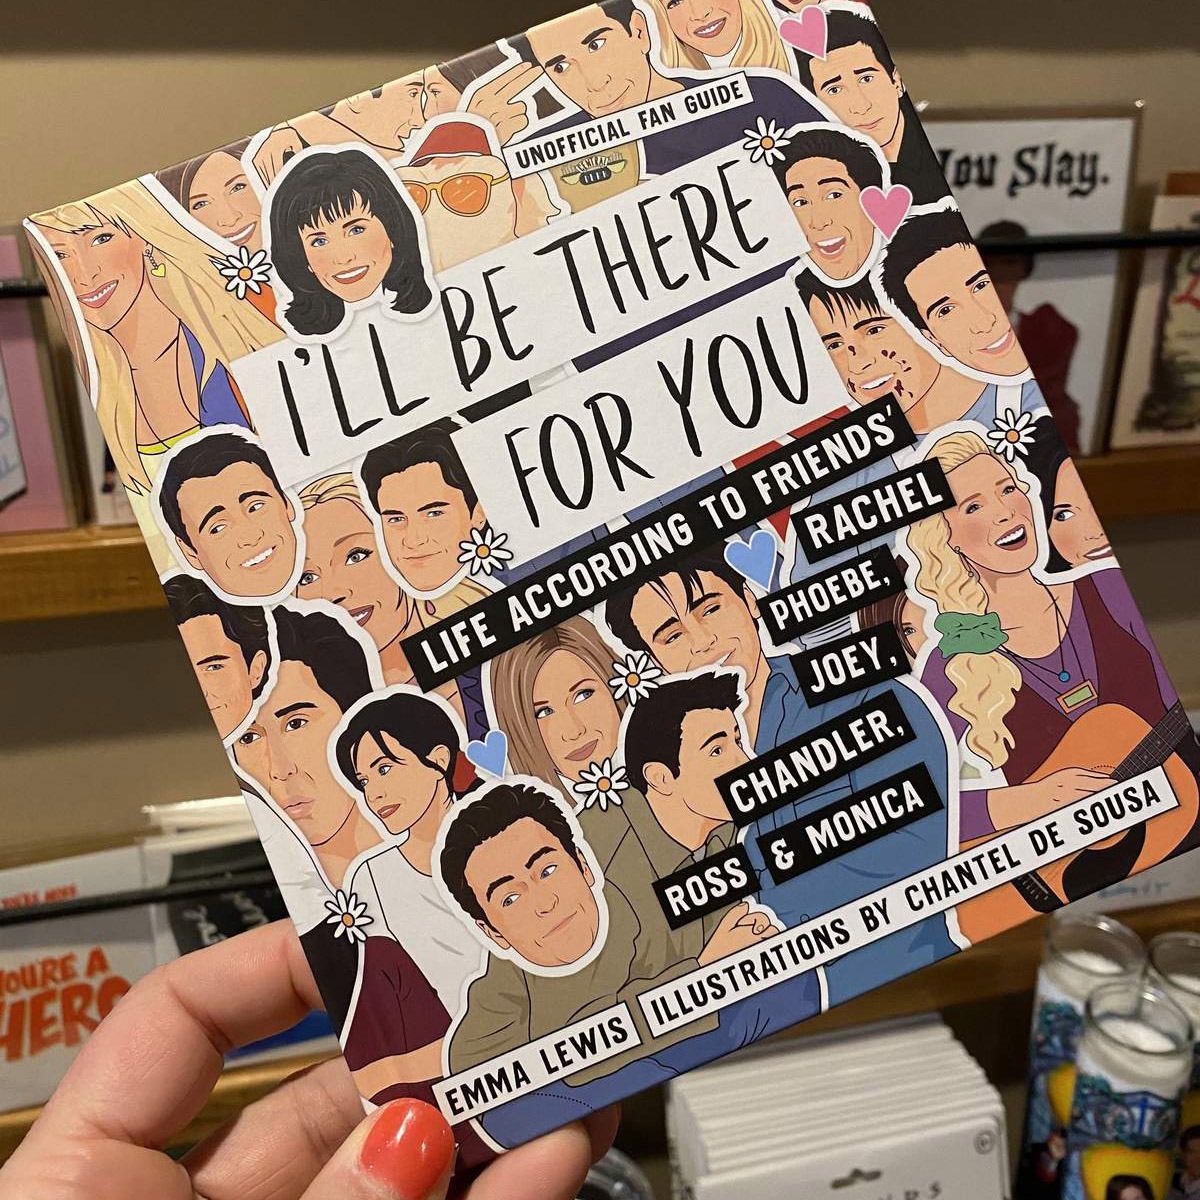 I ll Be There For You: Life according to Friends  Rachel, Phoebe, Joey, Chandler, Ross  Monica